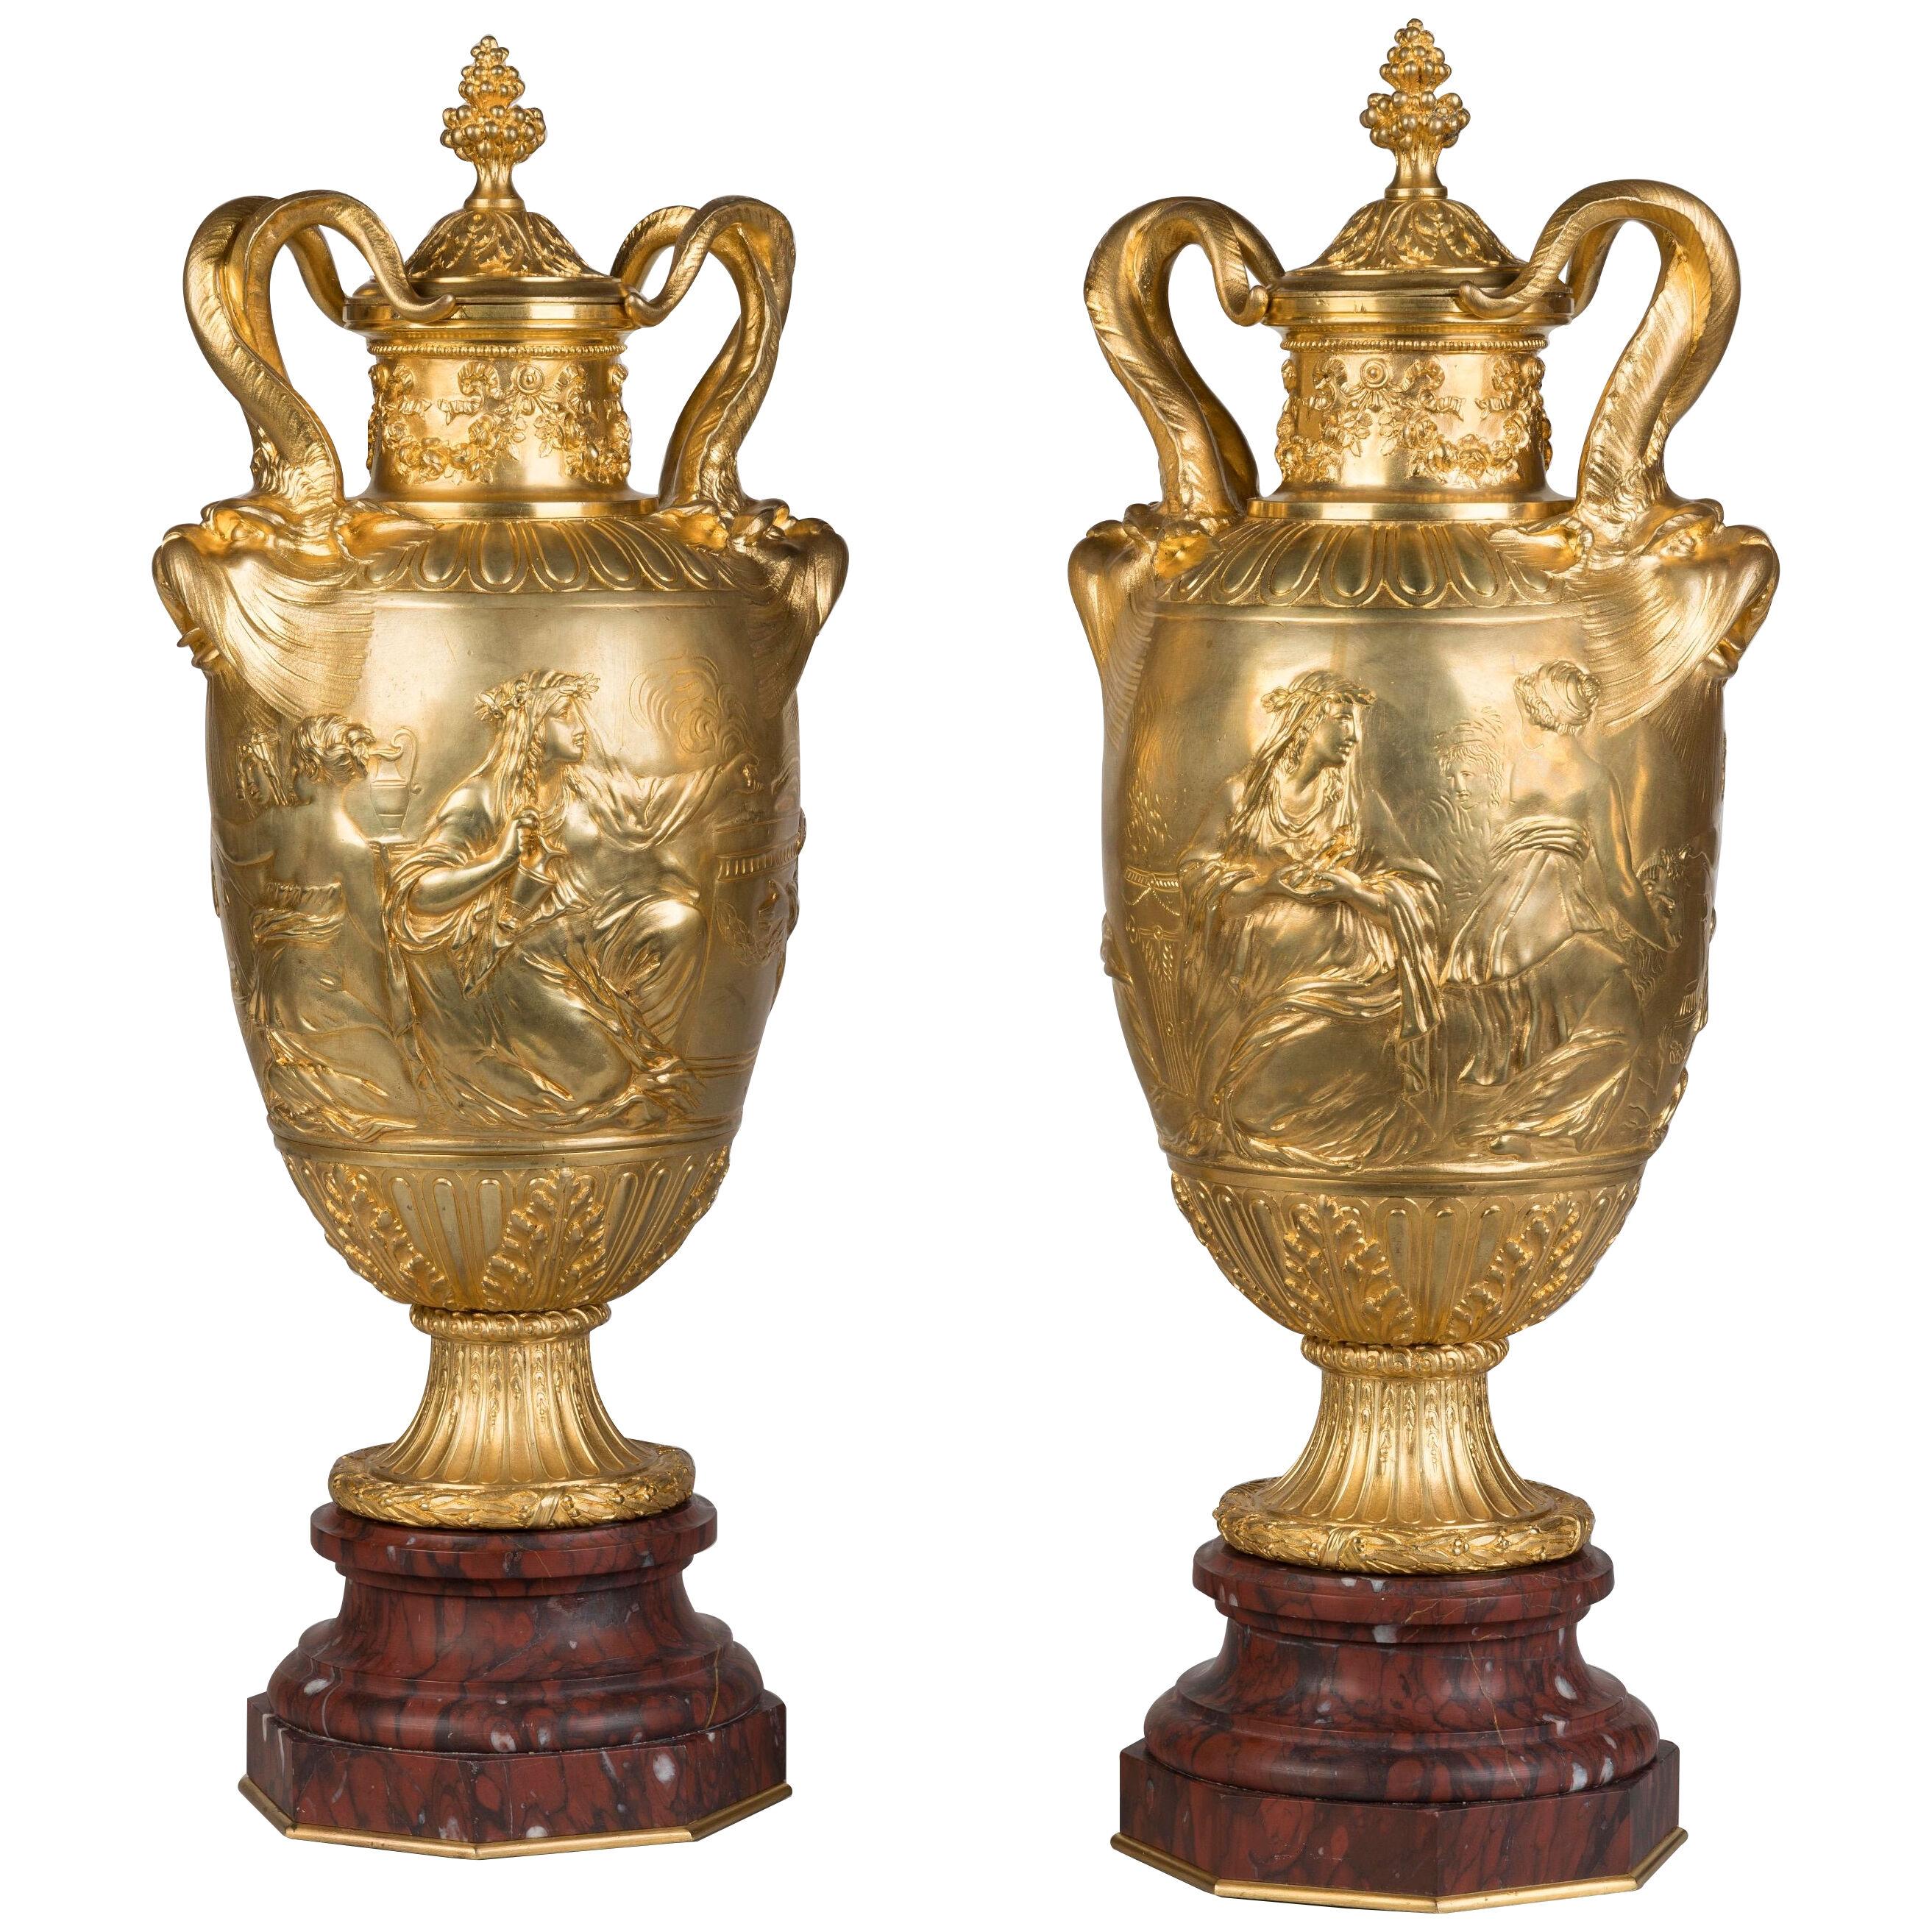 A Pair of Gilded Bronze Vases Depicting the 'Sacrifice to Venus'